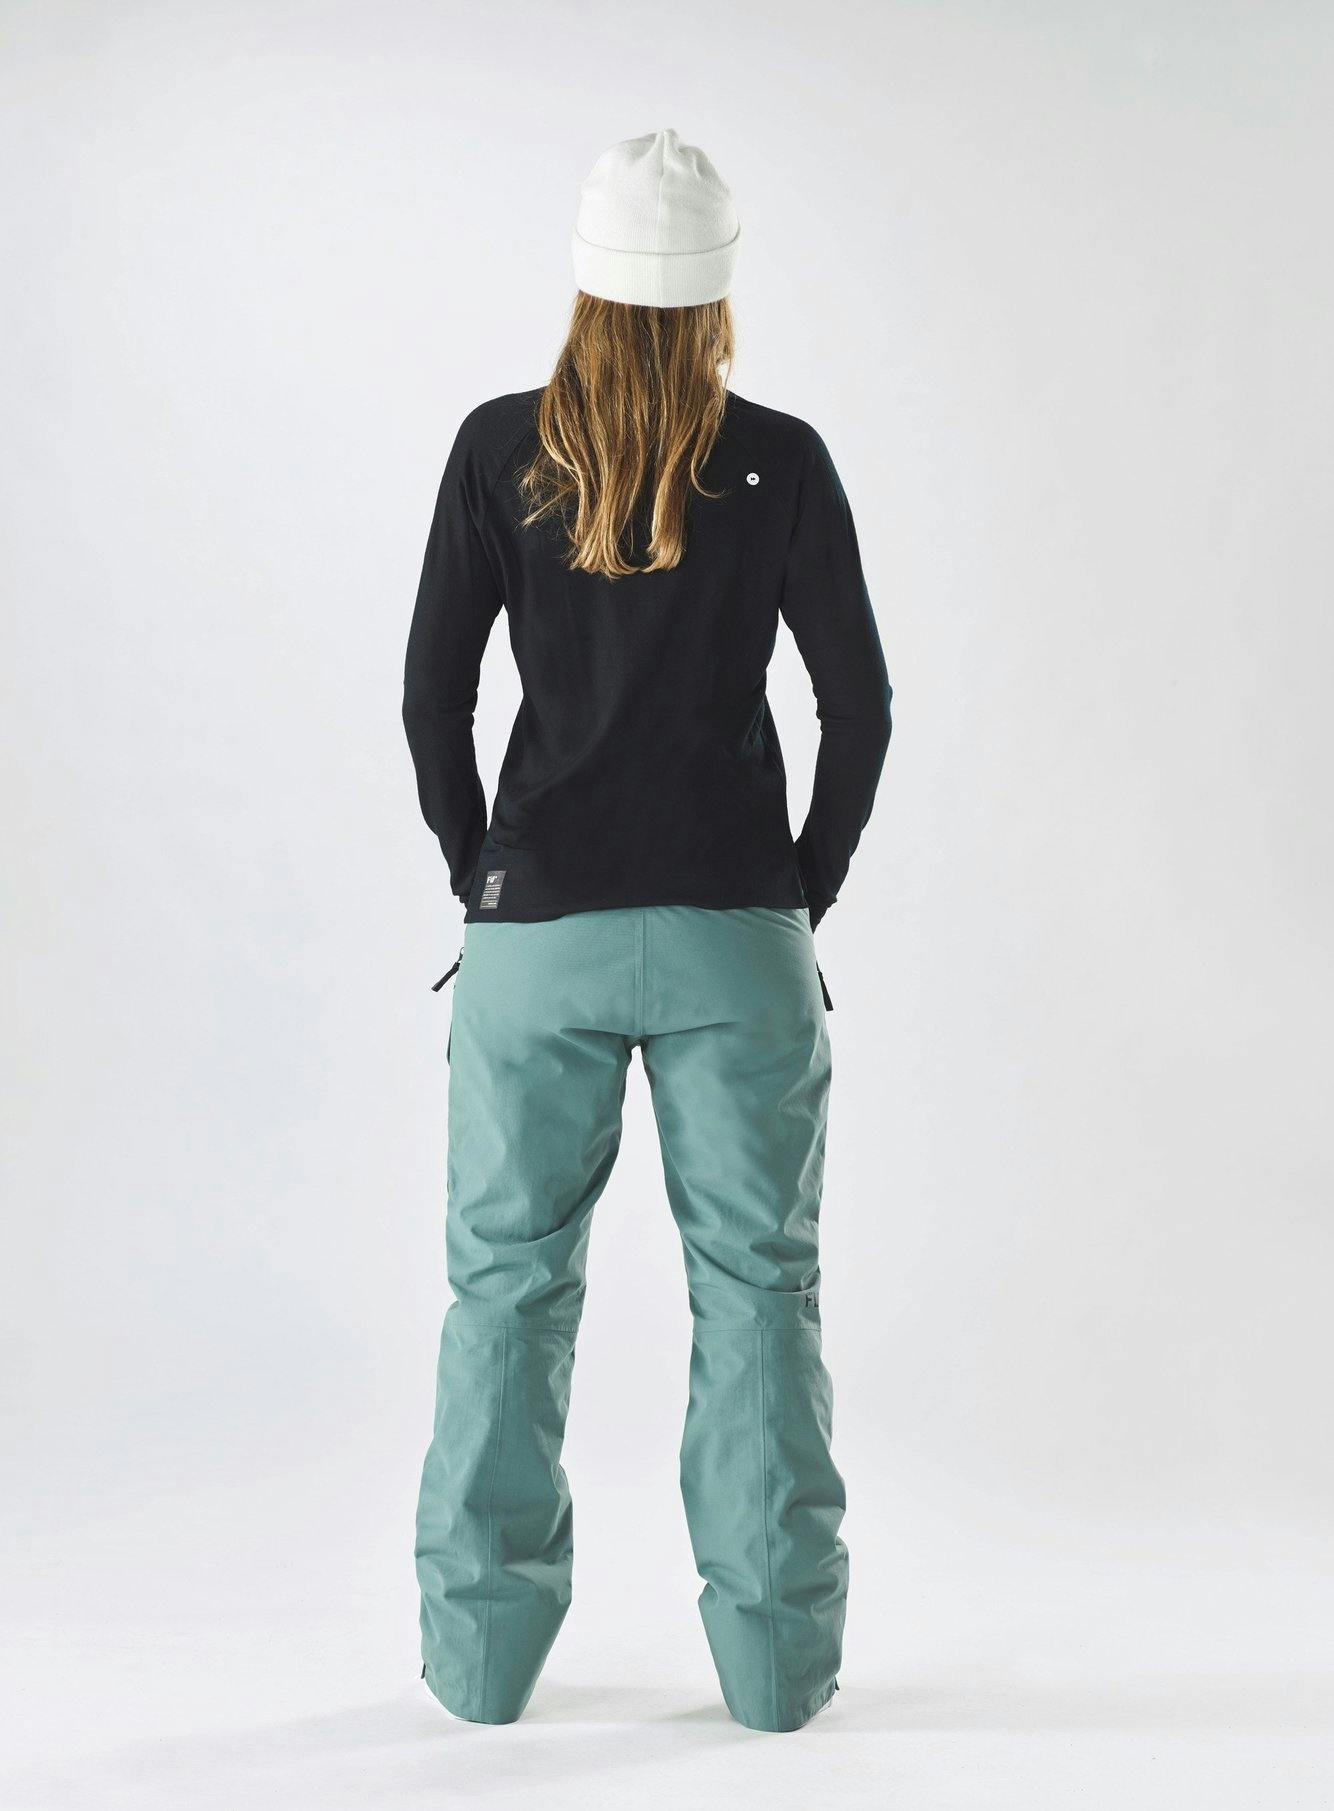 FW Women's Catalyst 2L Insulated Pants